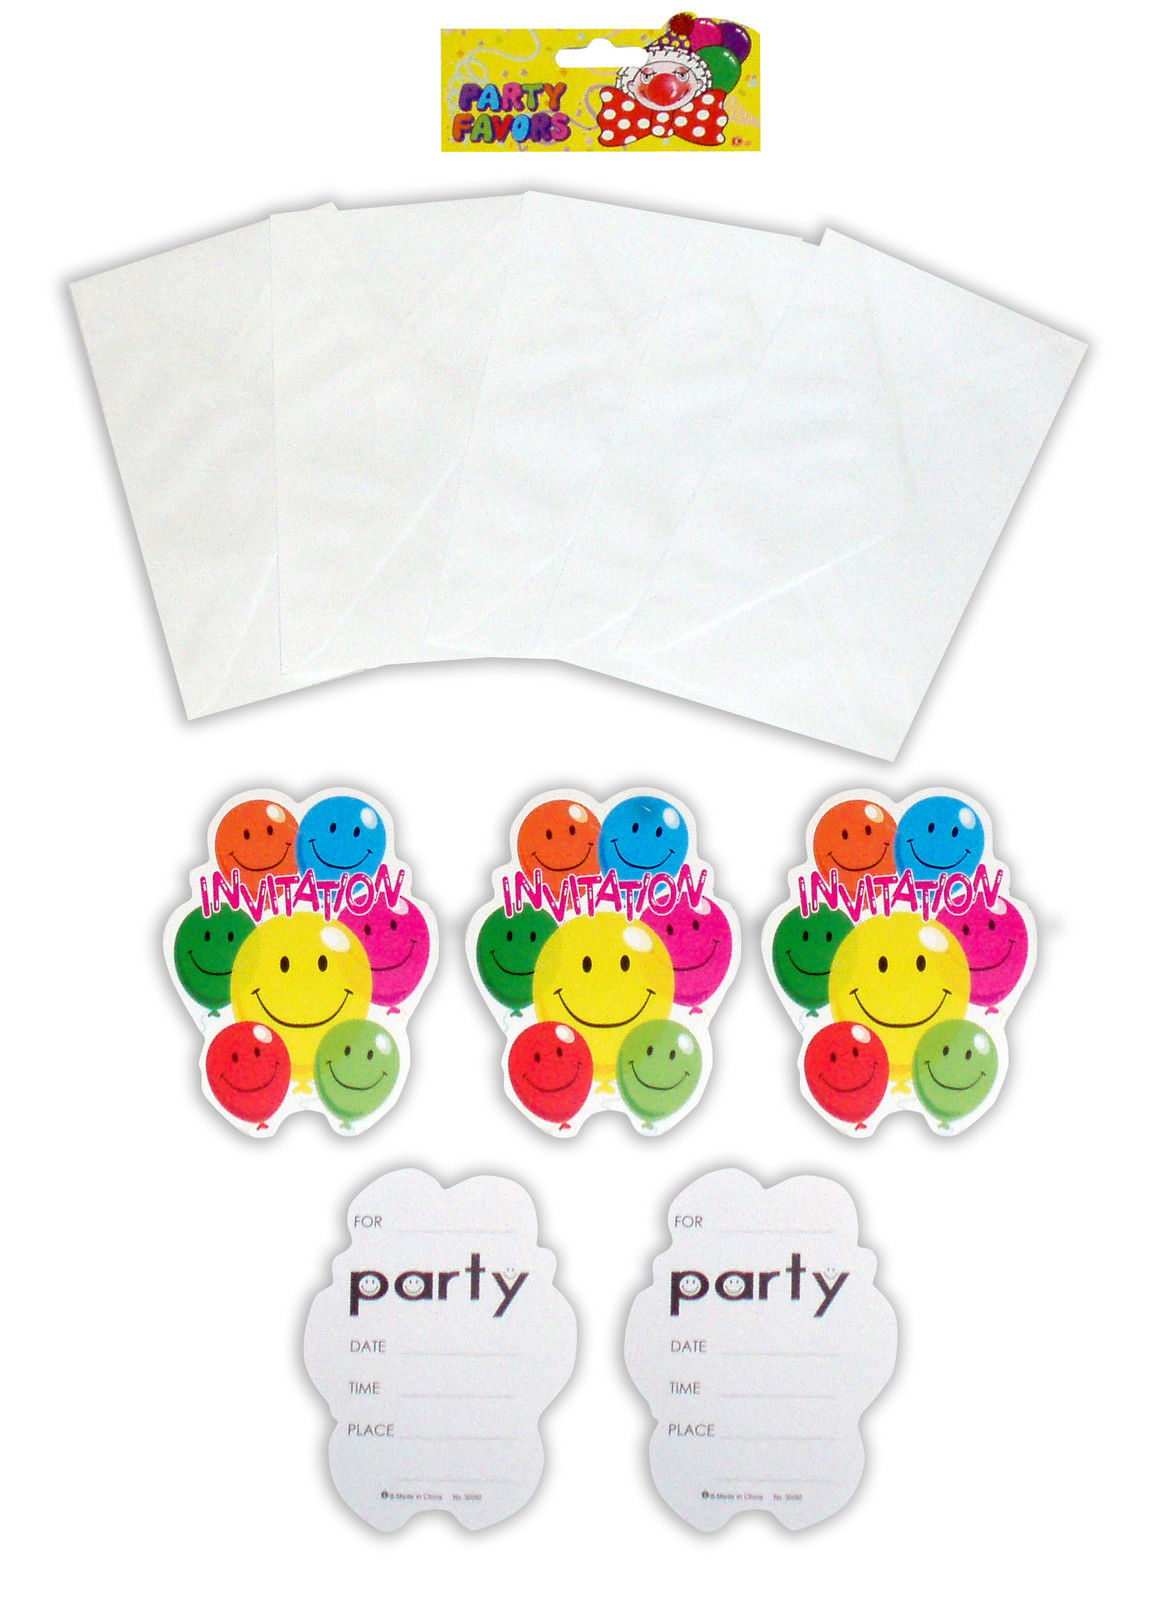 Pack of 5 Invitations Smiling Balloons Birthday Party with Envelopes